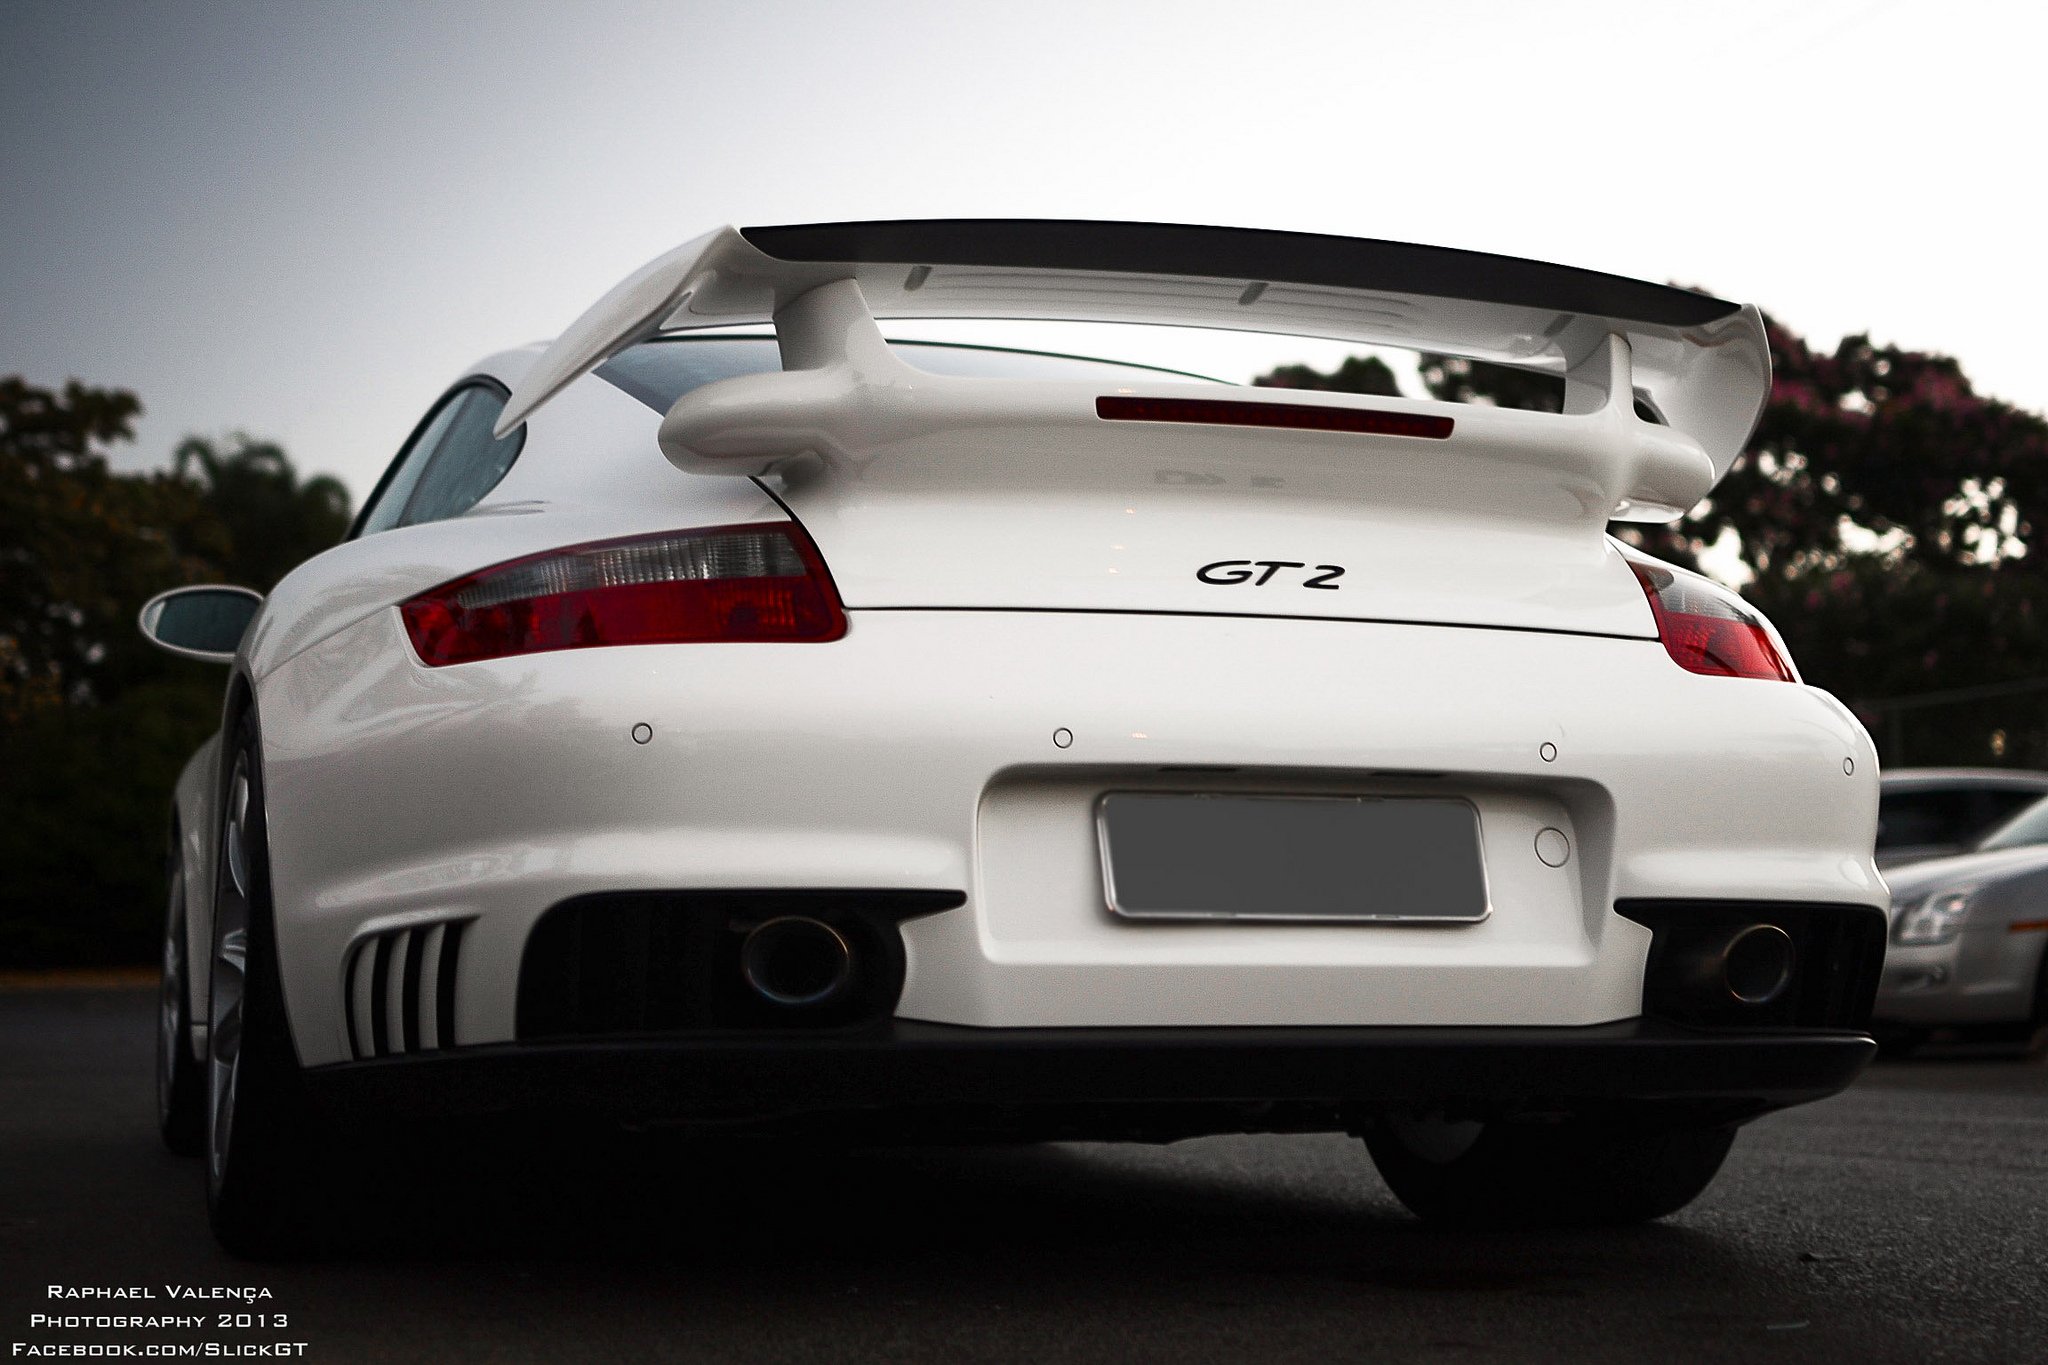 911, Cars, Coupe, Germany, Gt2, Gt2, Rs, Porsche, Blanc, White Wallpaper